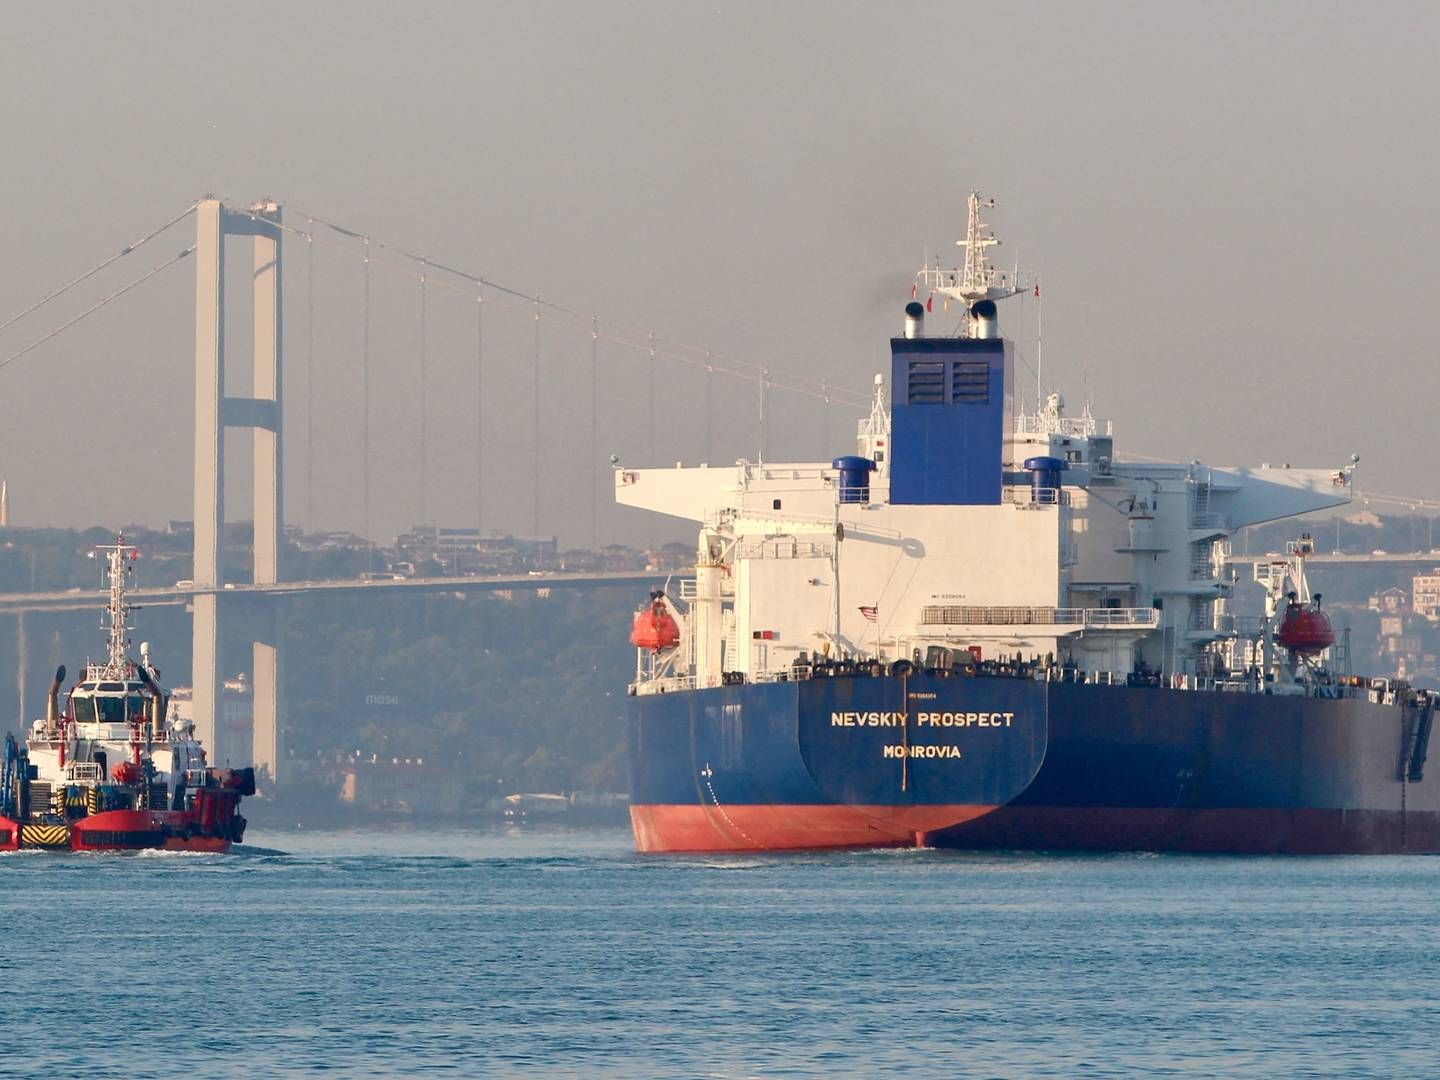 The crude oil tanker Nevskiy Prospect, owned by Russia's state-owned tanker company Sovcomflot, sails through the Bosphorus in Istanbul, Turkey, in 2020.